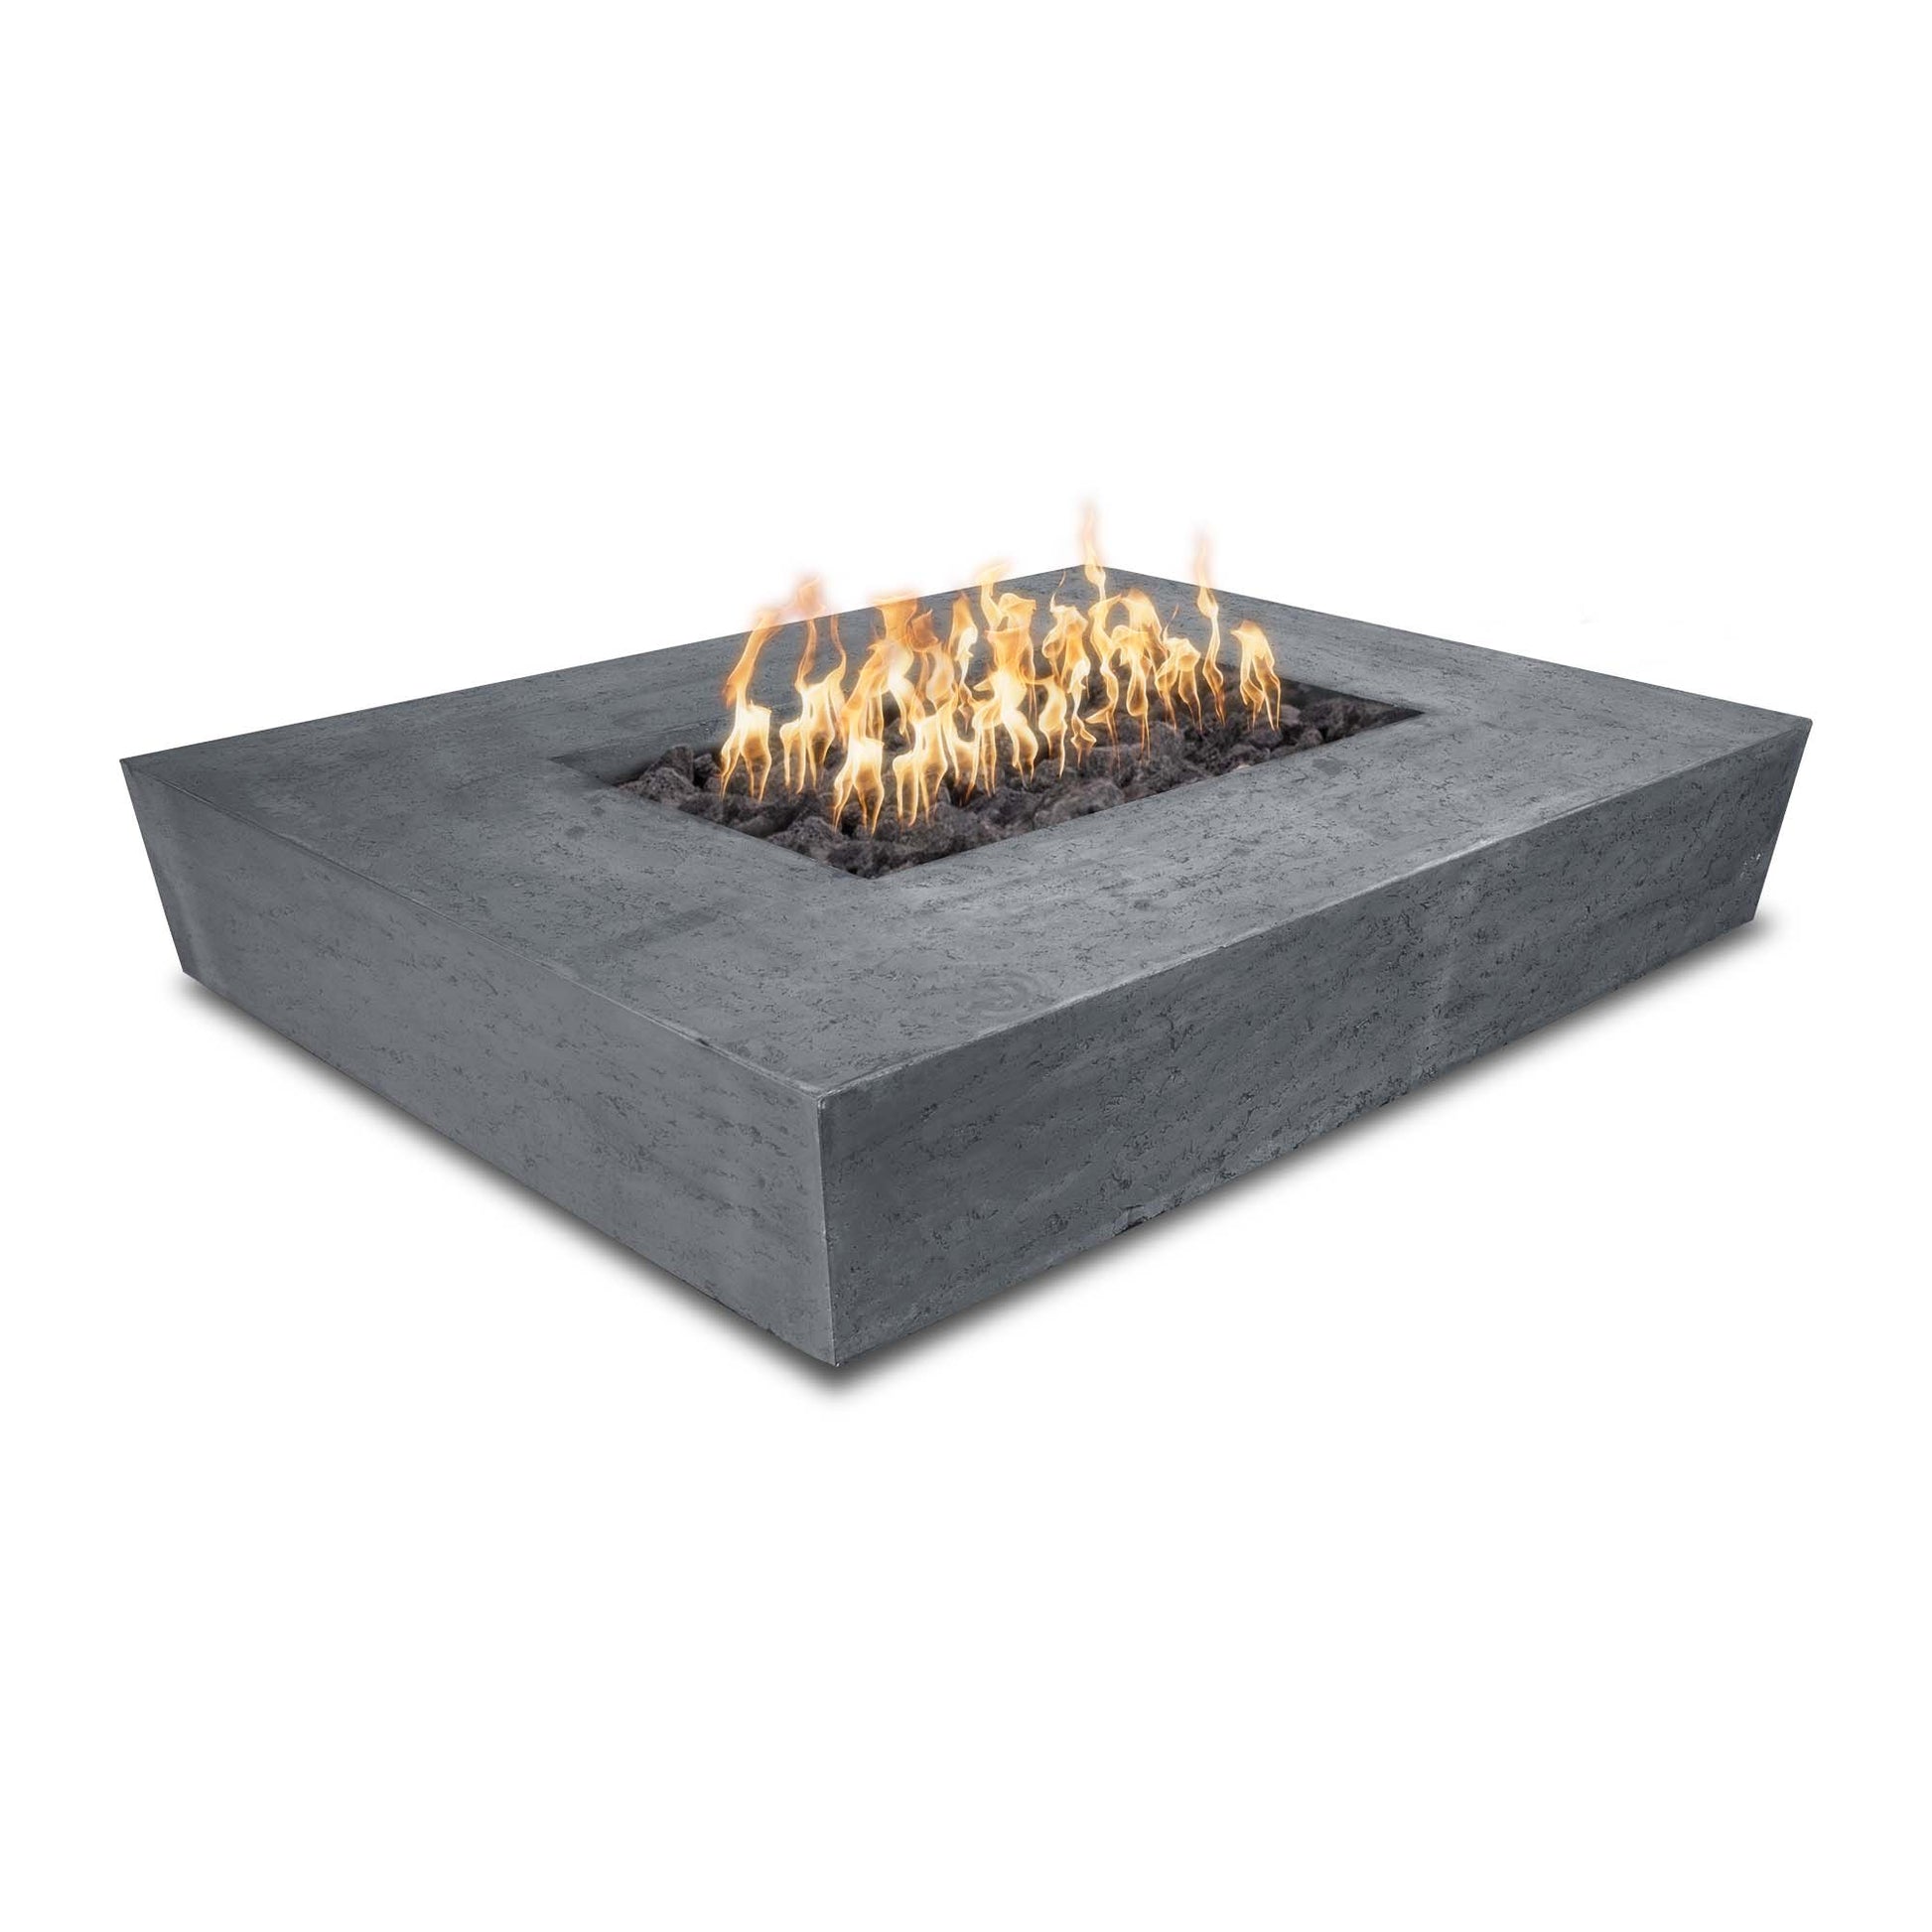 The Outdoor Plus Rectangular Heiko 58" Rustic Coffee GFRC Concrete Liquid Propane Fire Pit with Match Lit with Flame Sense Ignition